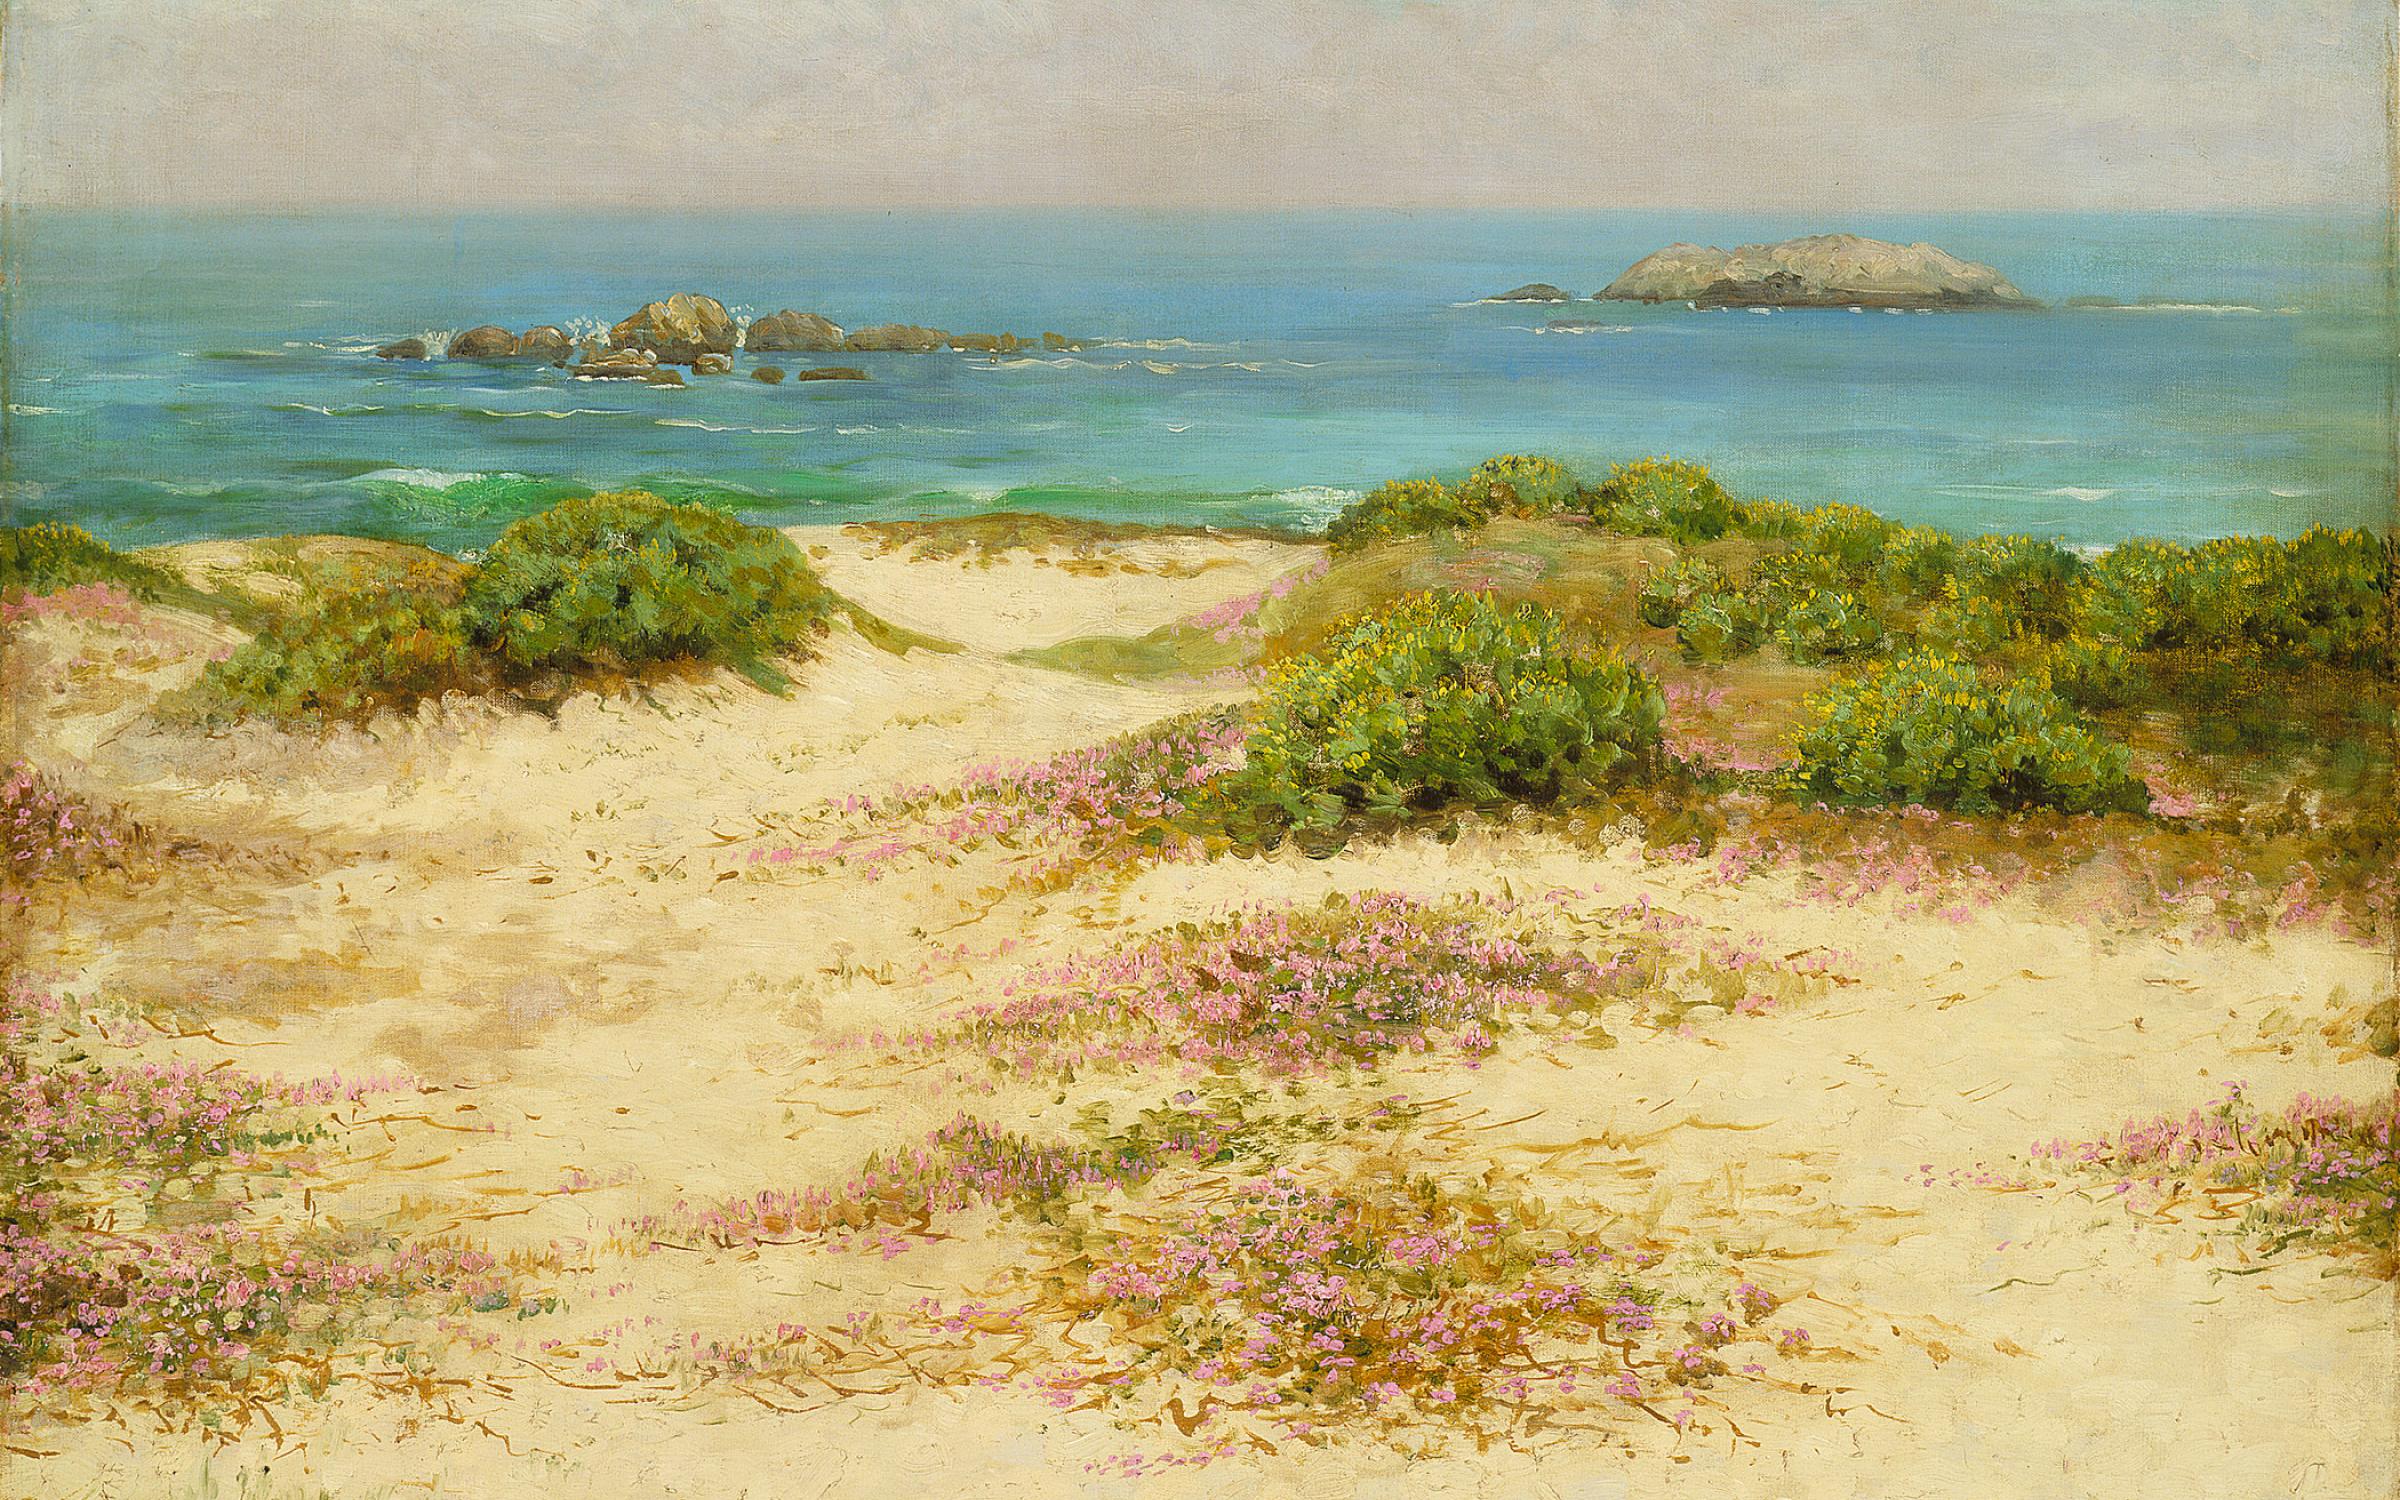 A beach scene with patches of grass in the sand. Rocks protrude from the ocean in the background.